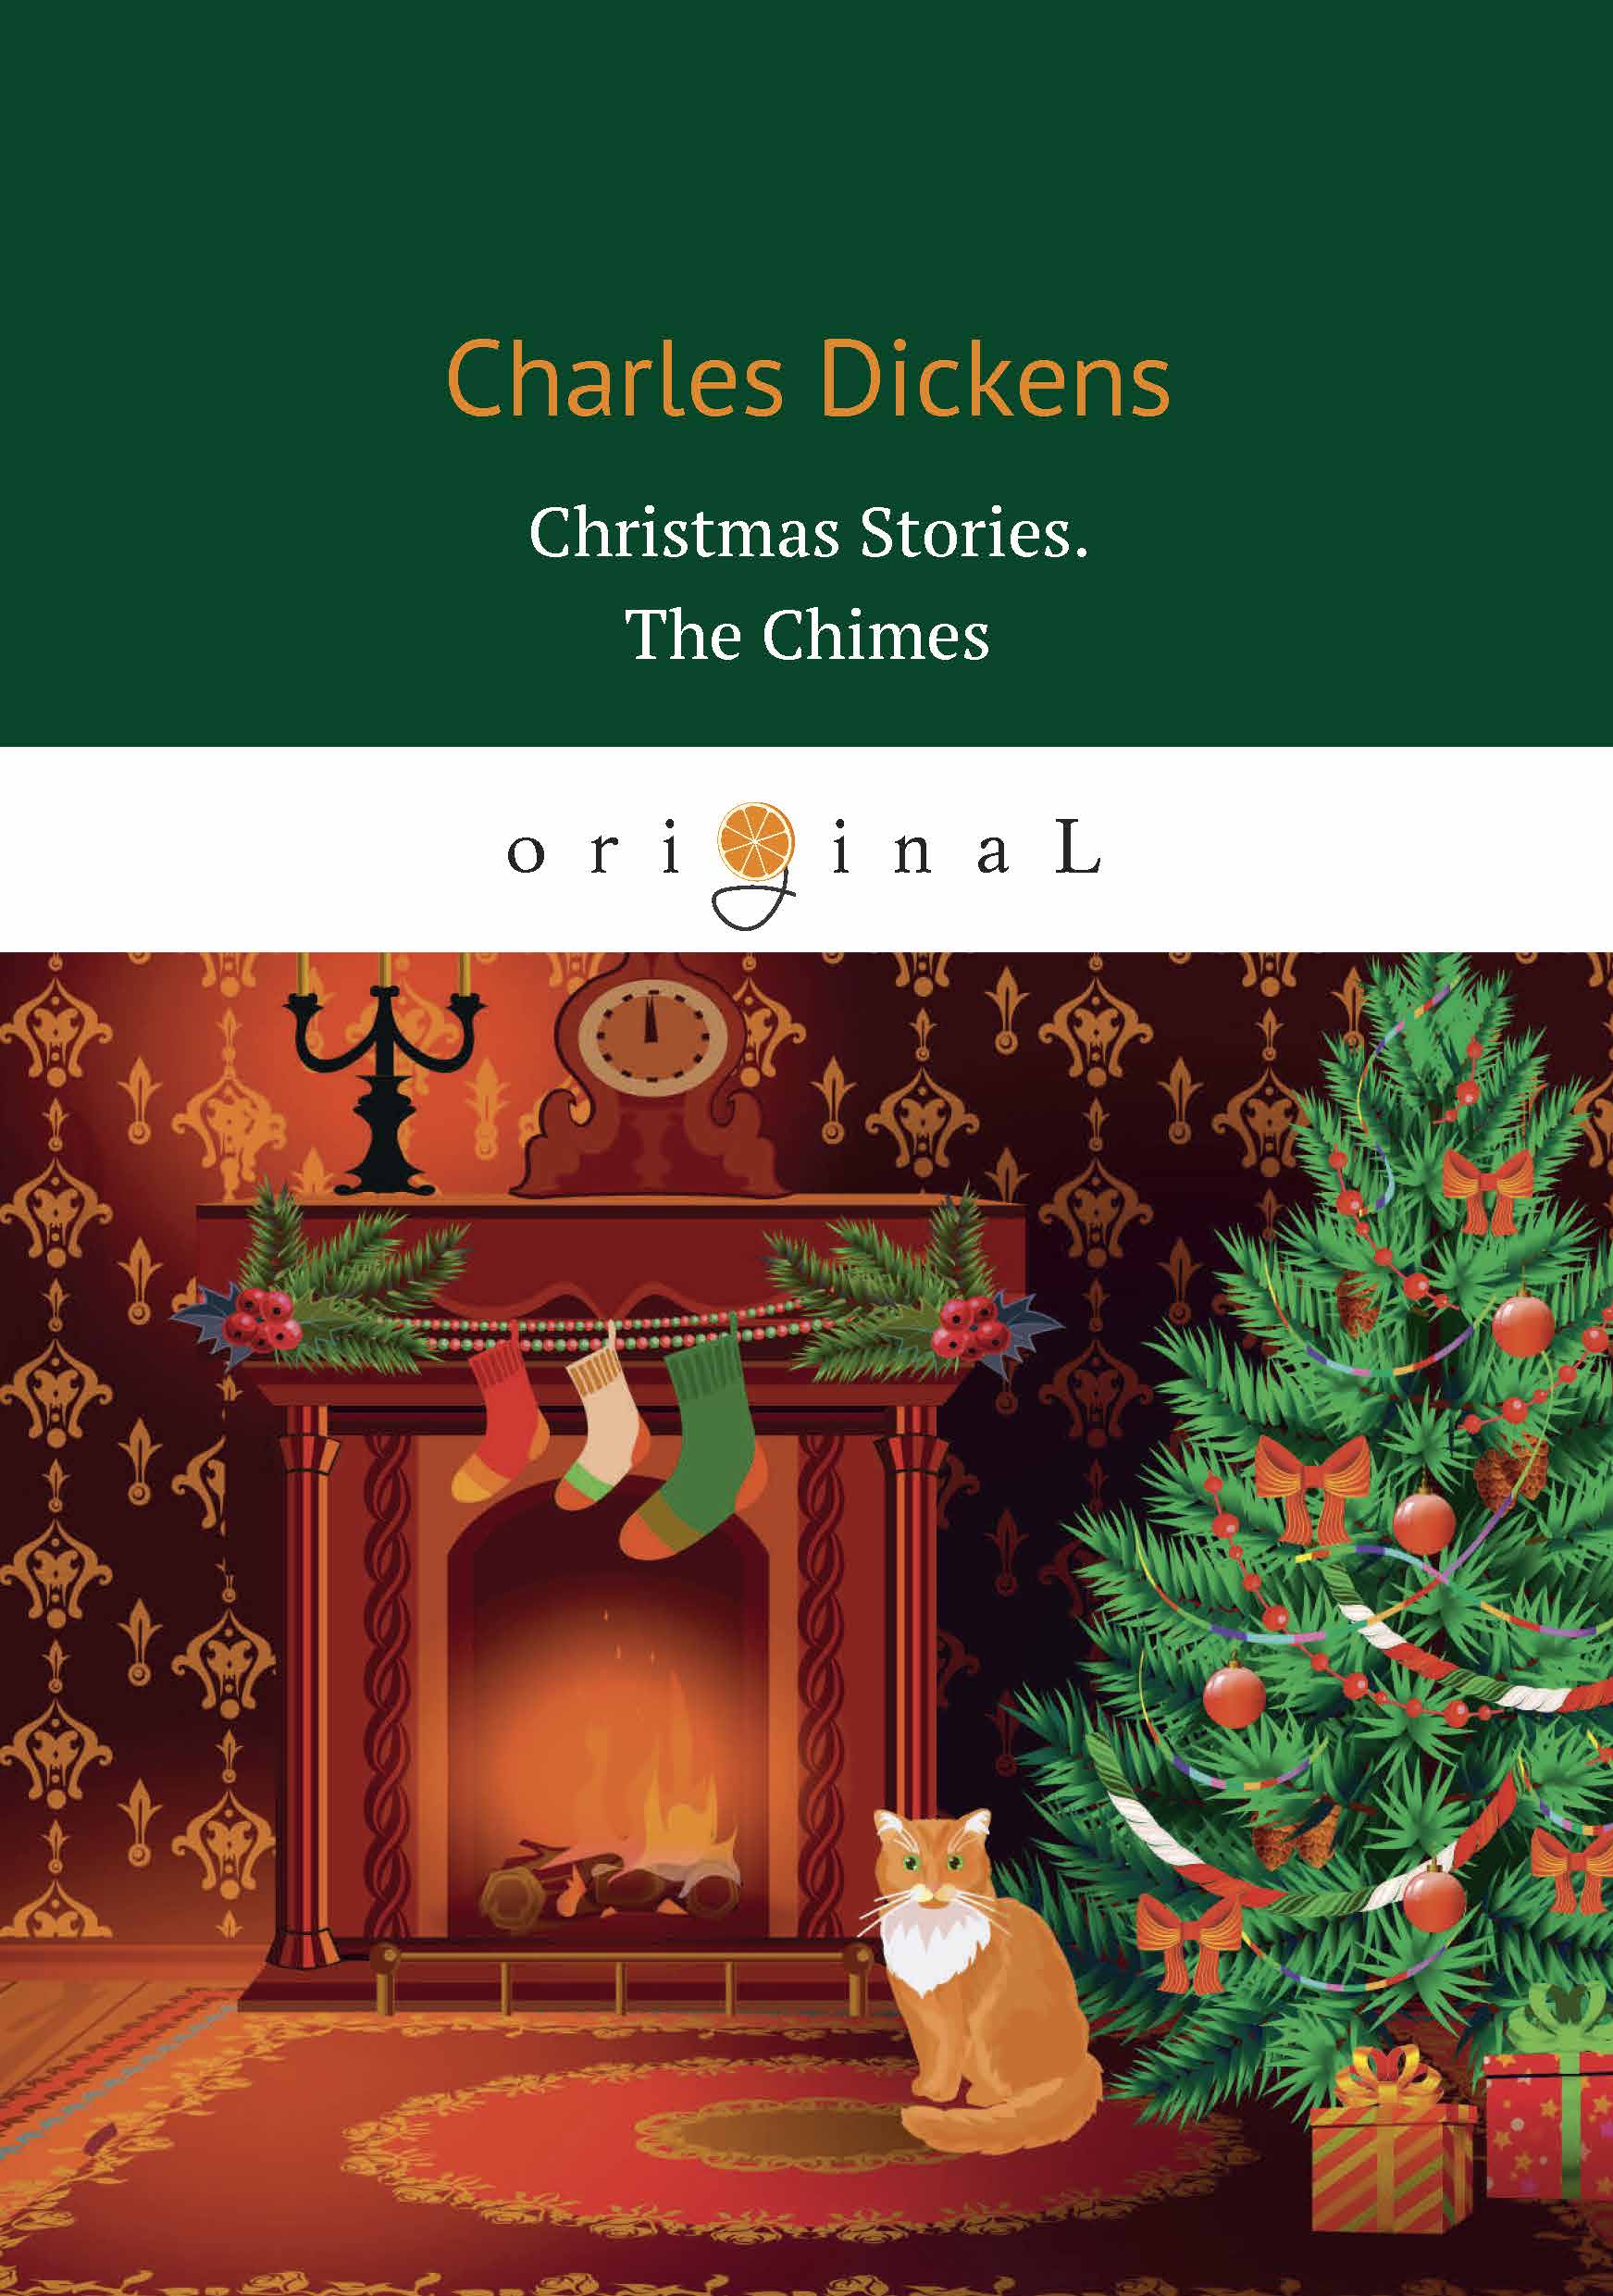 Christmas Stories: The Chimes